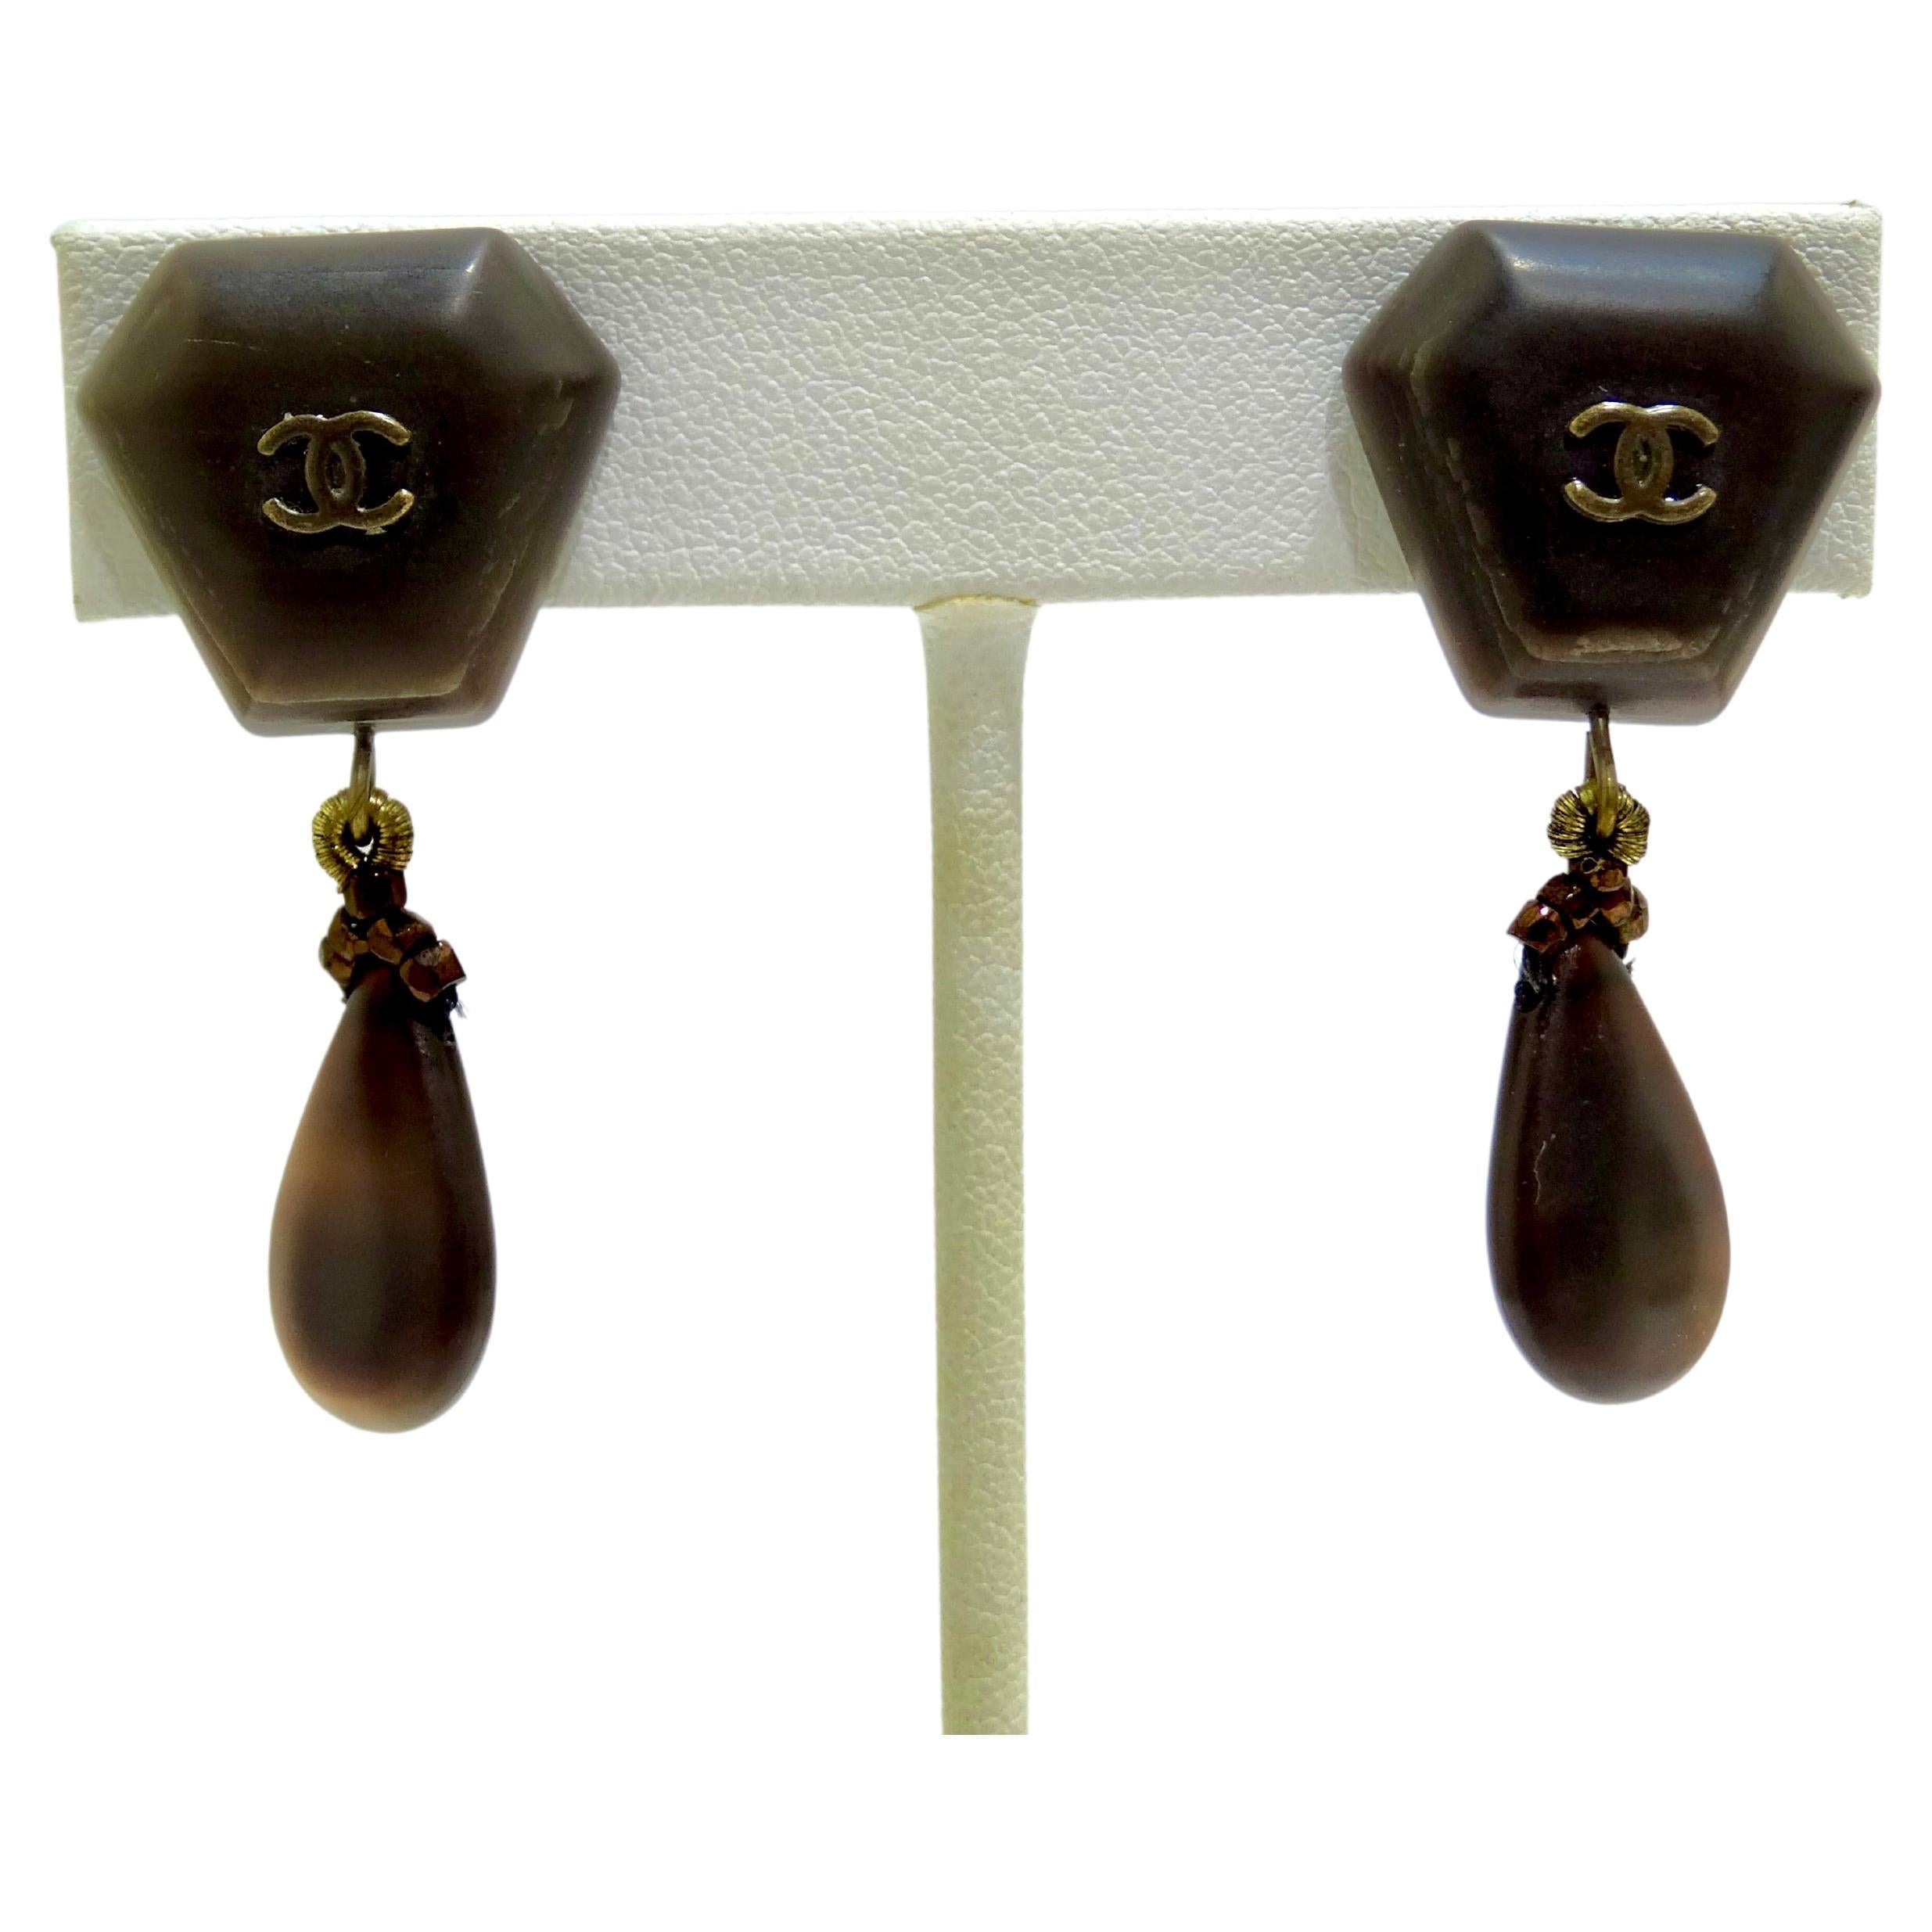 Chanel brings elegance and simplicity to the table with these 1999 Autumn Collection 'CC' drop earrings. An iconic emblem for the brand, Chanel's Interlocking CC motif has been a key cornerstone in collections for years. Boasting a wood